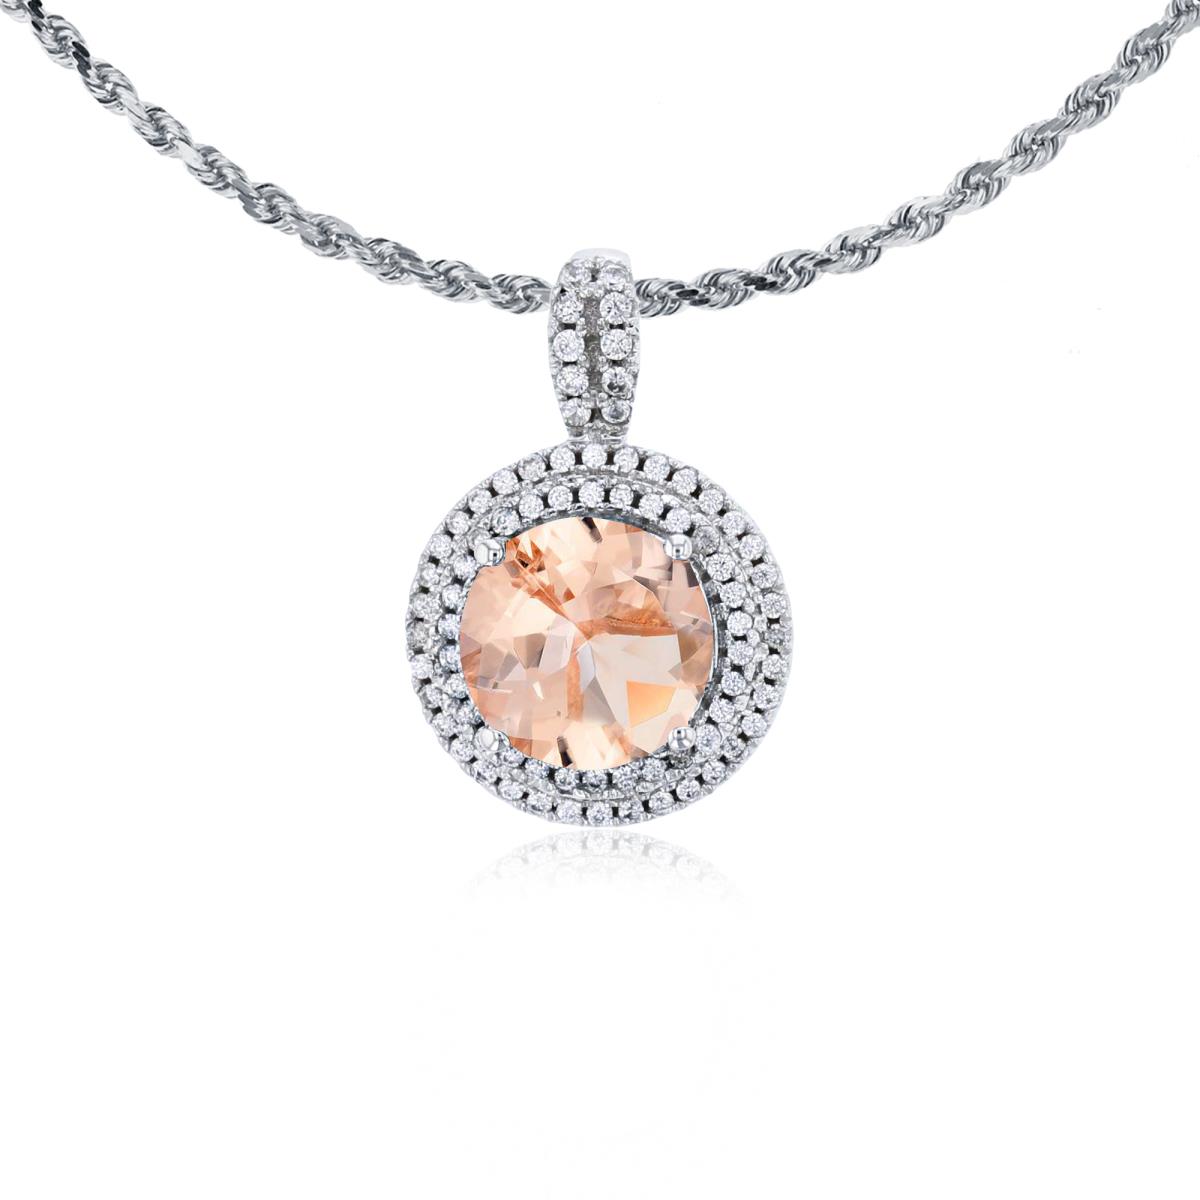 10K White Gold 7mm Round Morganite & 0.25 CTTW Diamonds Double Halo 18" Rope Chain Necklace